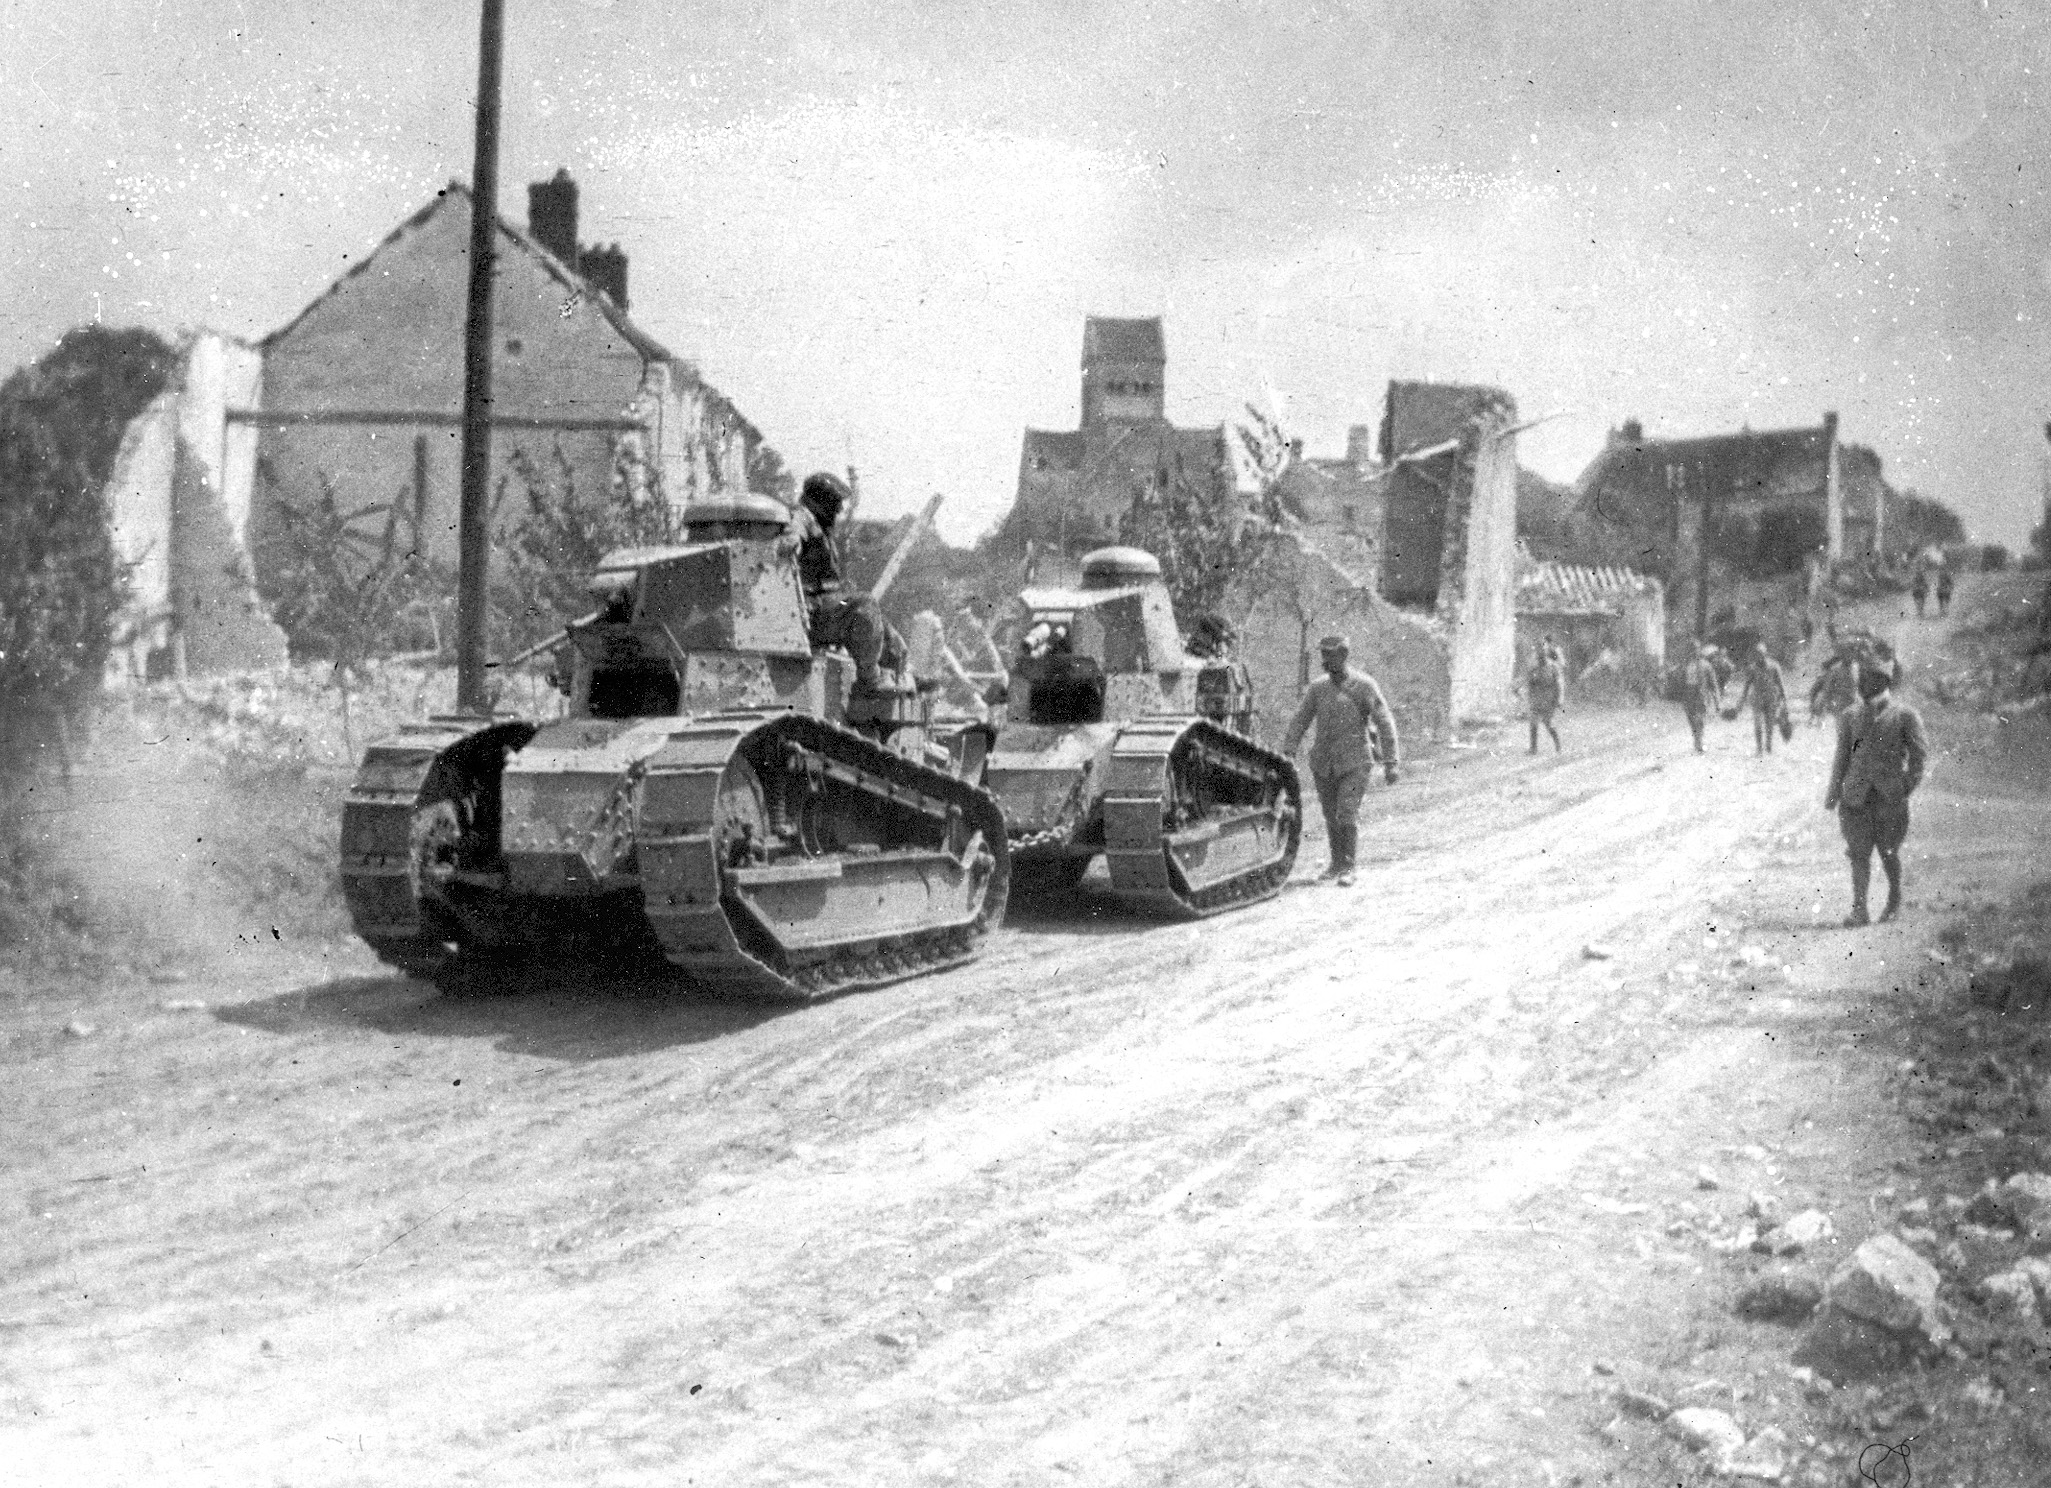 The smaller Allied tanks were meant to replace traditional horse cavalry. 